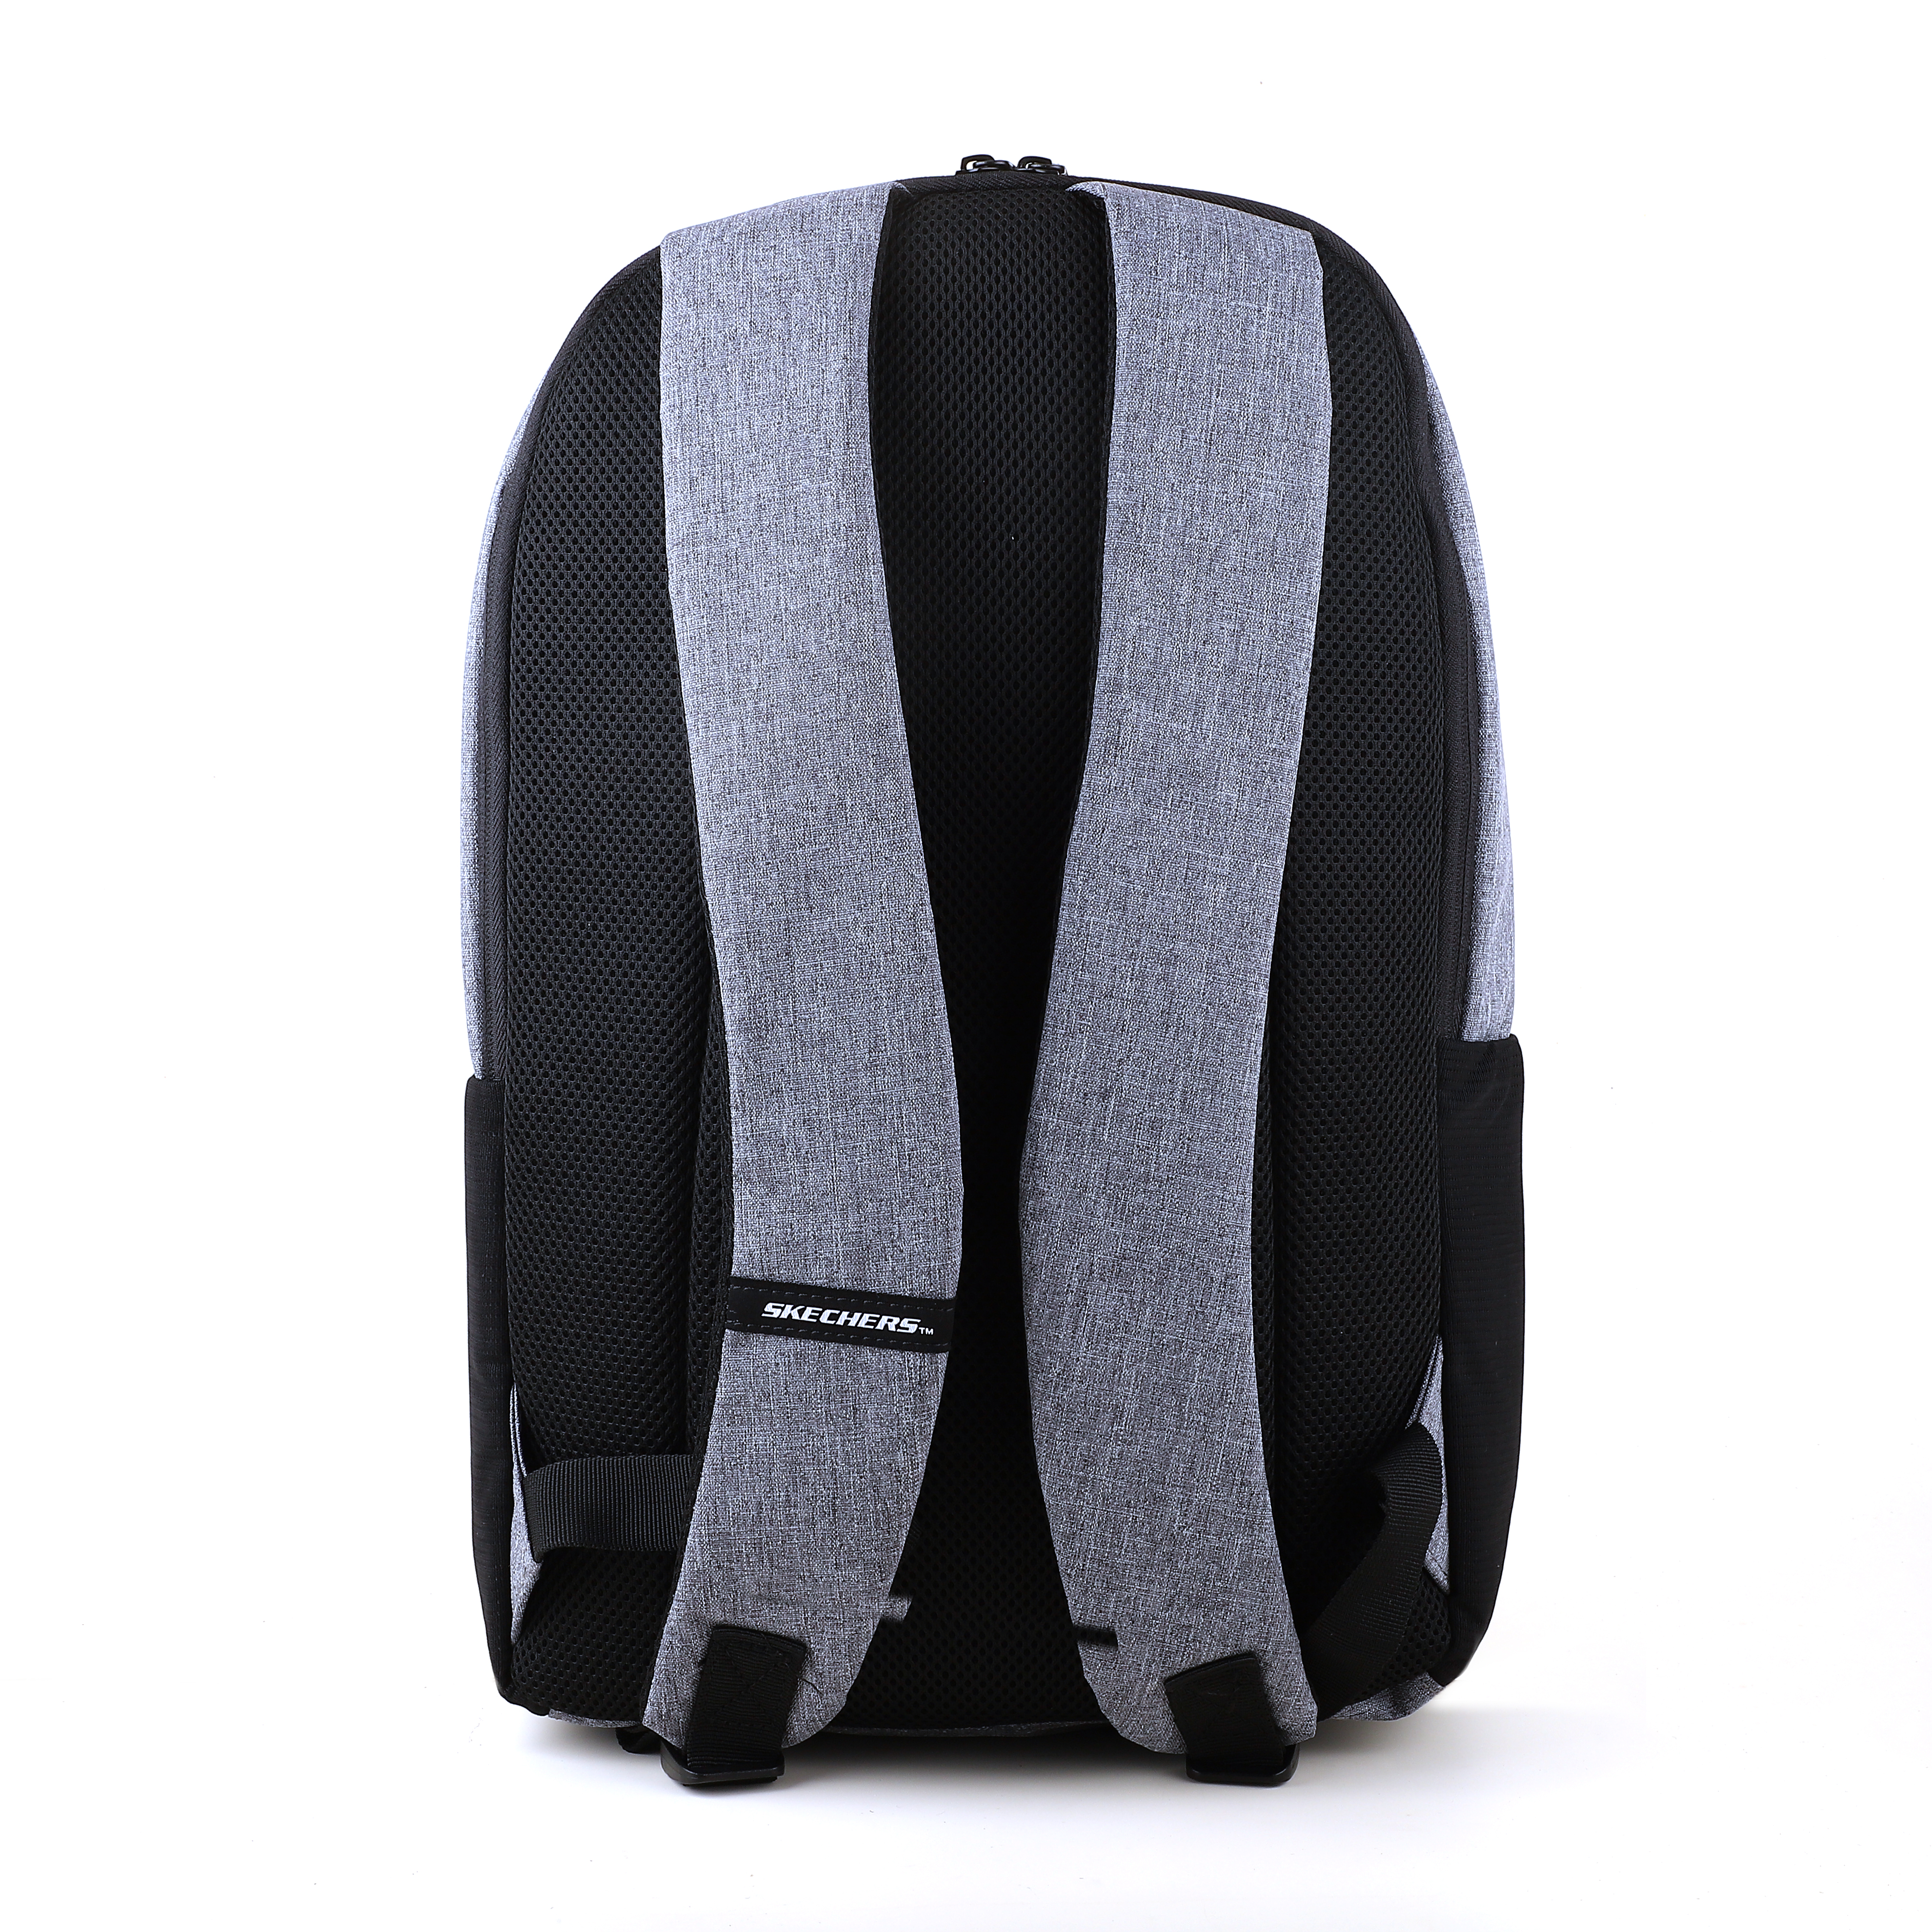 BACKPACK, Grey image number null